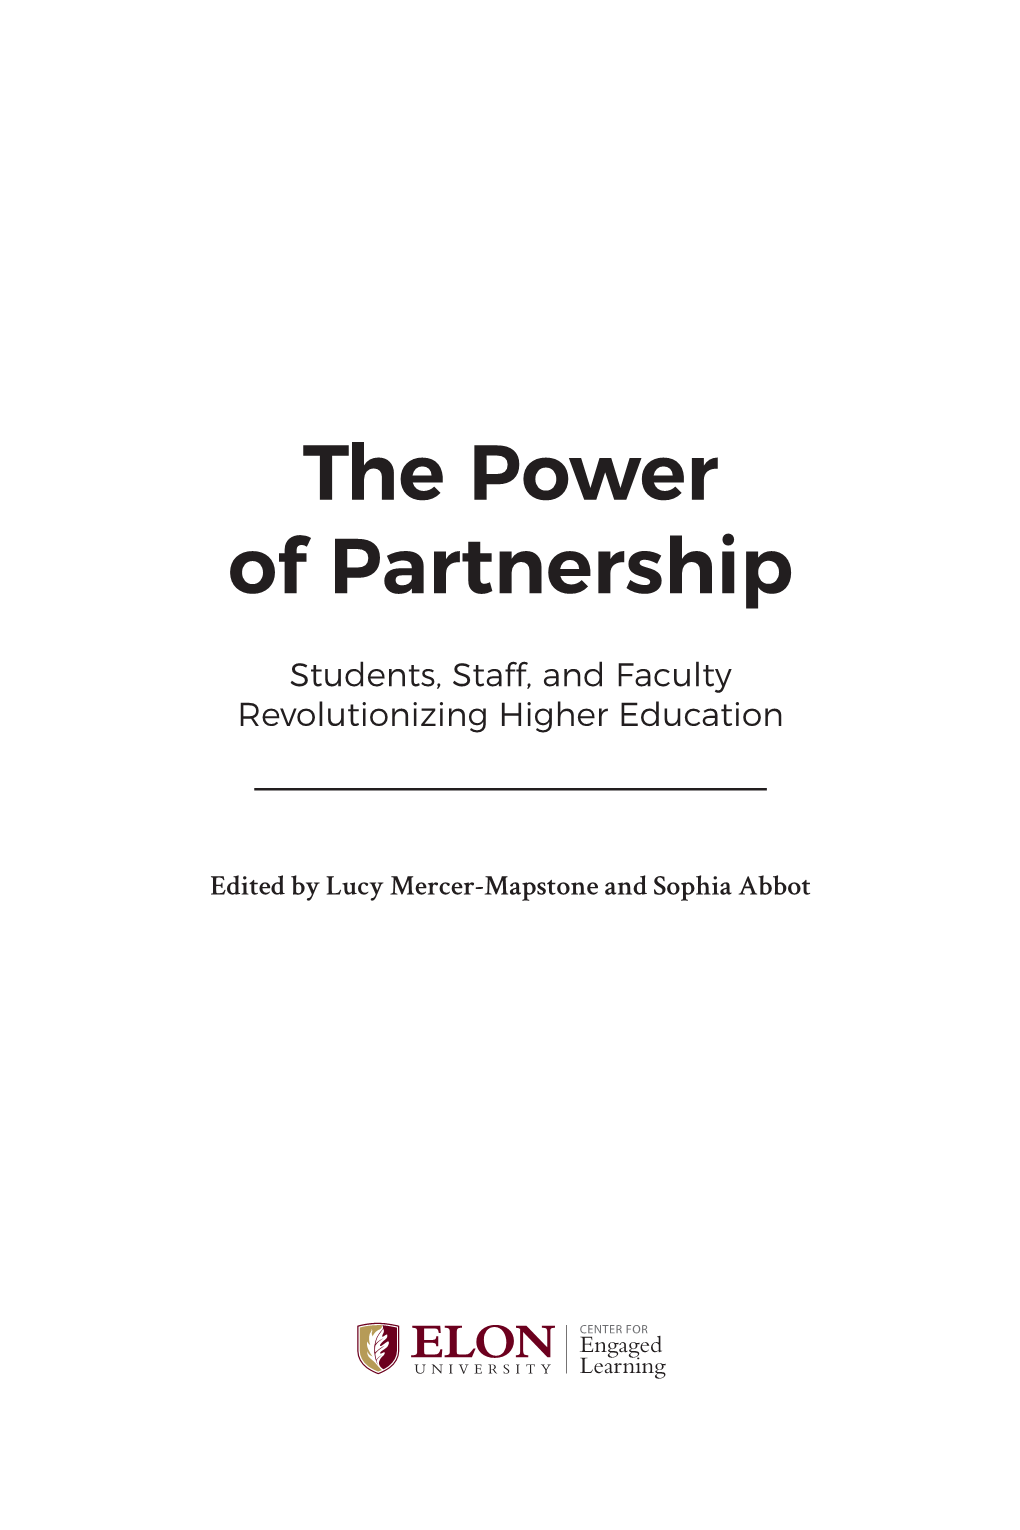 The Power of Partnership: Students, Staff, and Faculty Revolutionizing